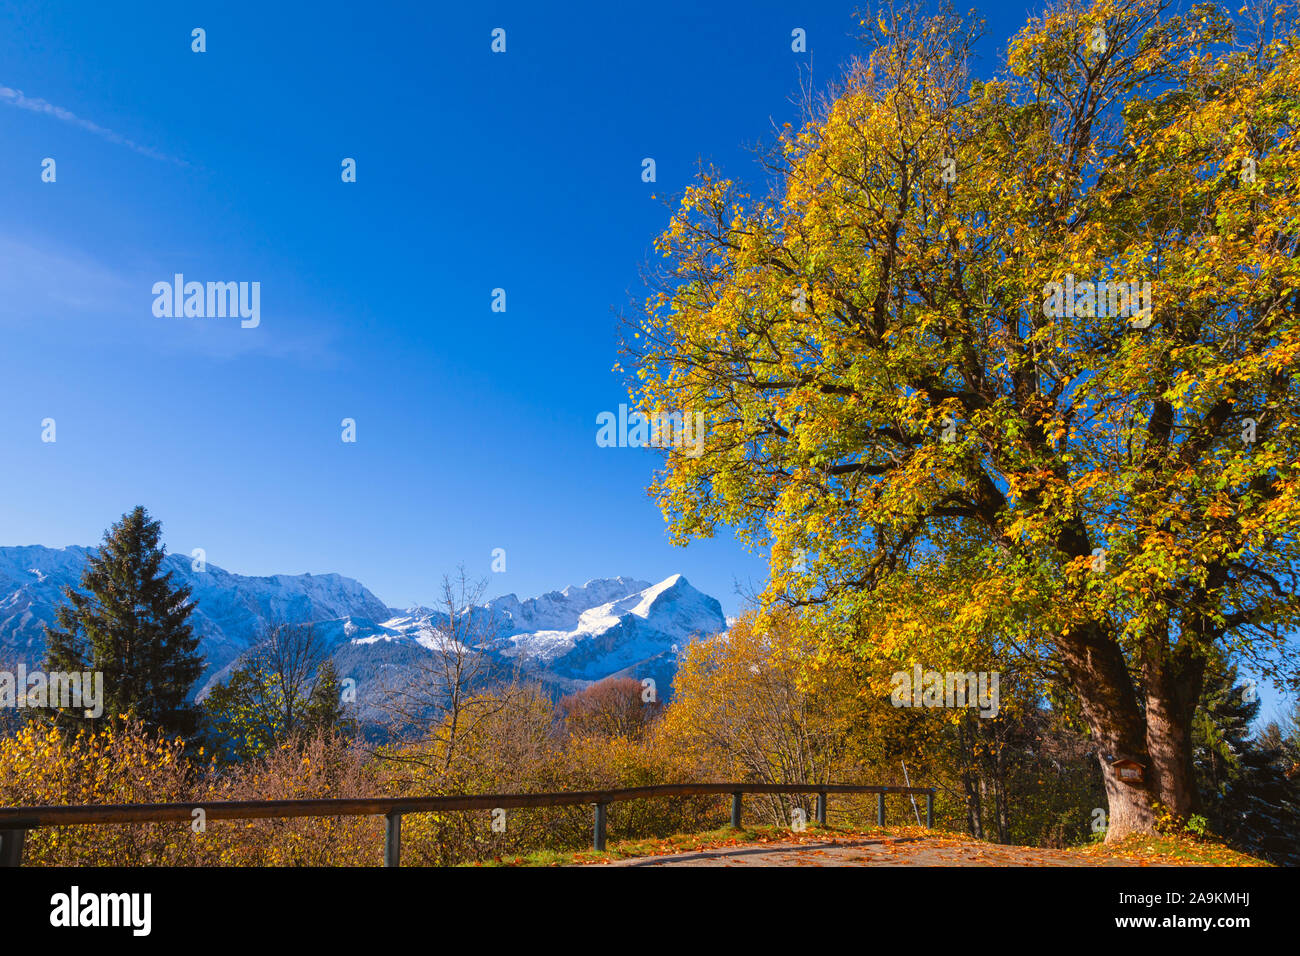 Alpine landscape with coloured trees and white snowy mountains in the background Stock Photo